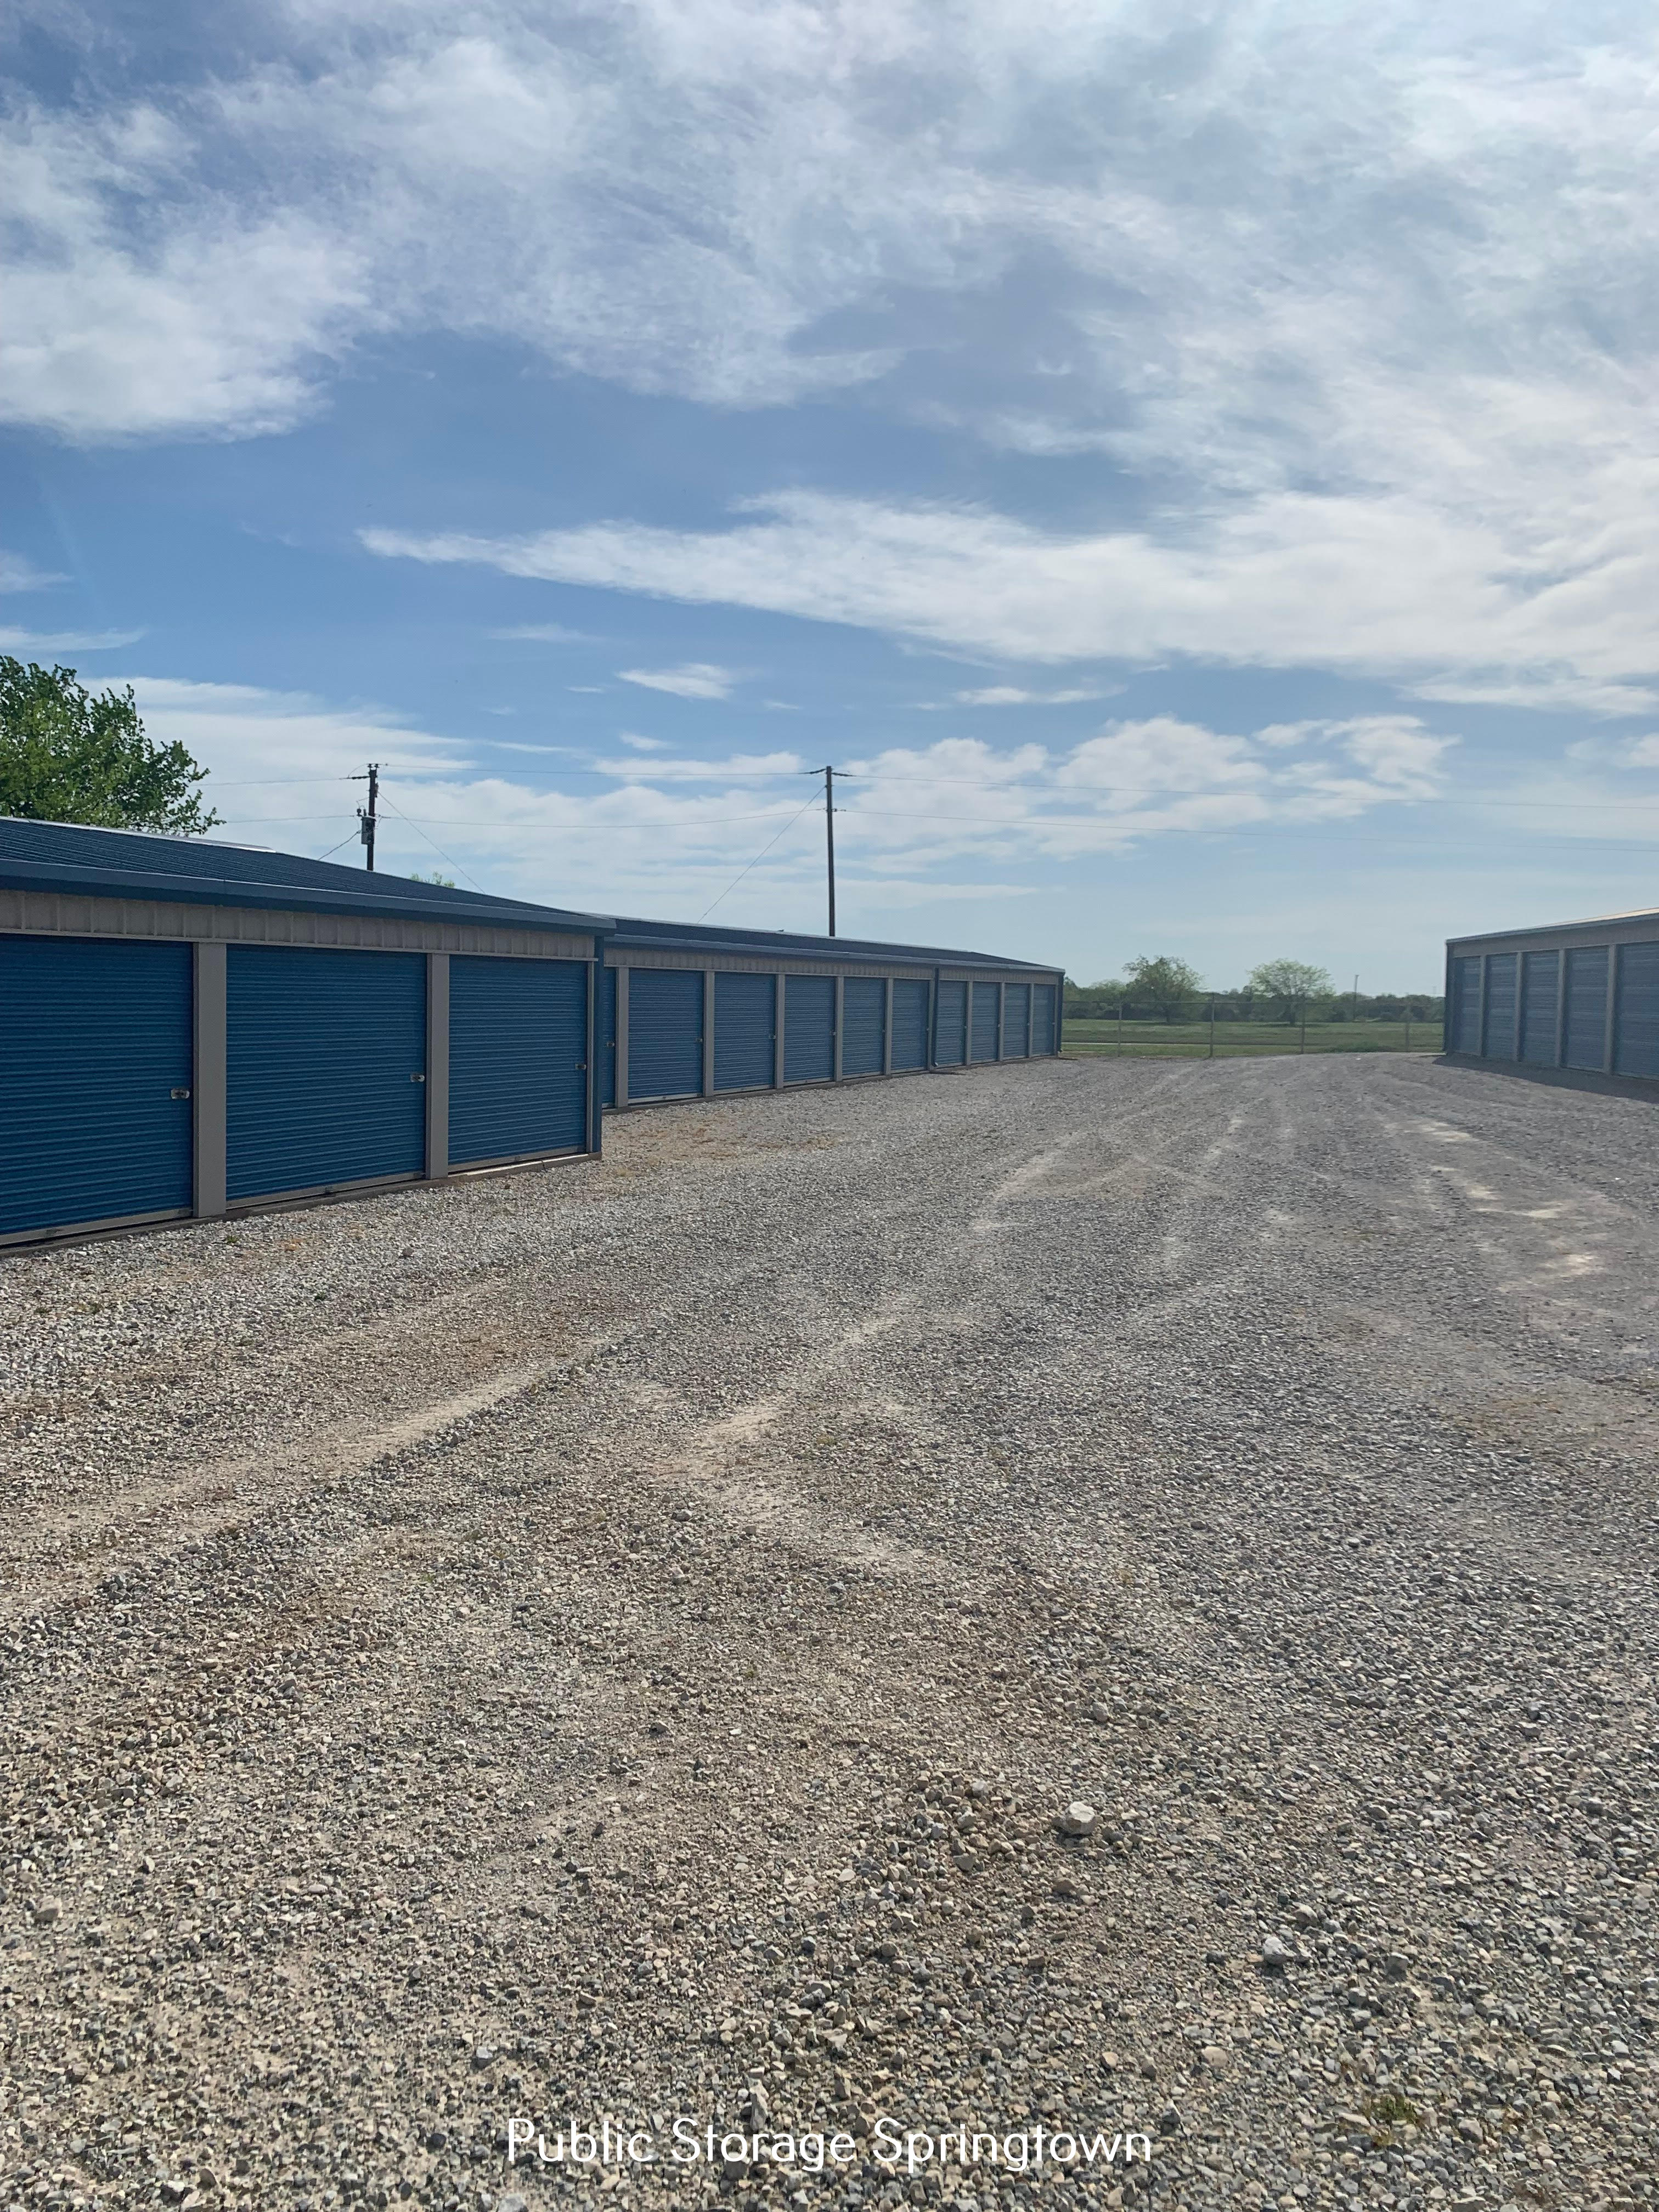 Springtown Self Storage Outlines Creative Uses for Self-Storage beyond Storing Household Items